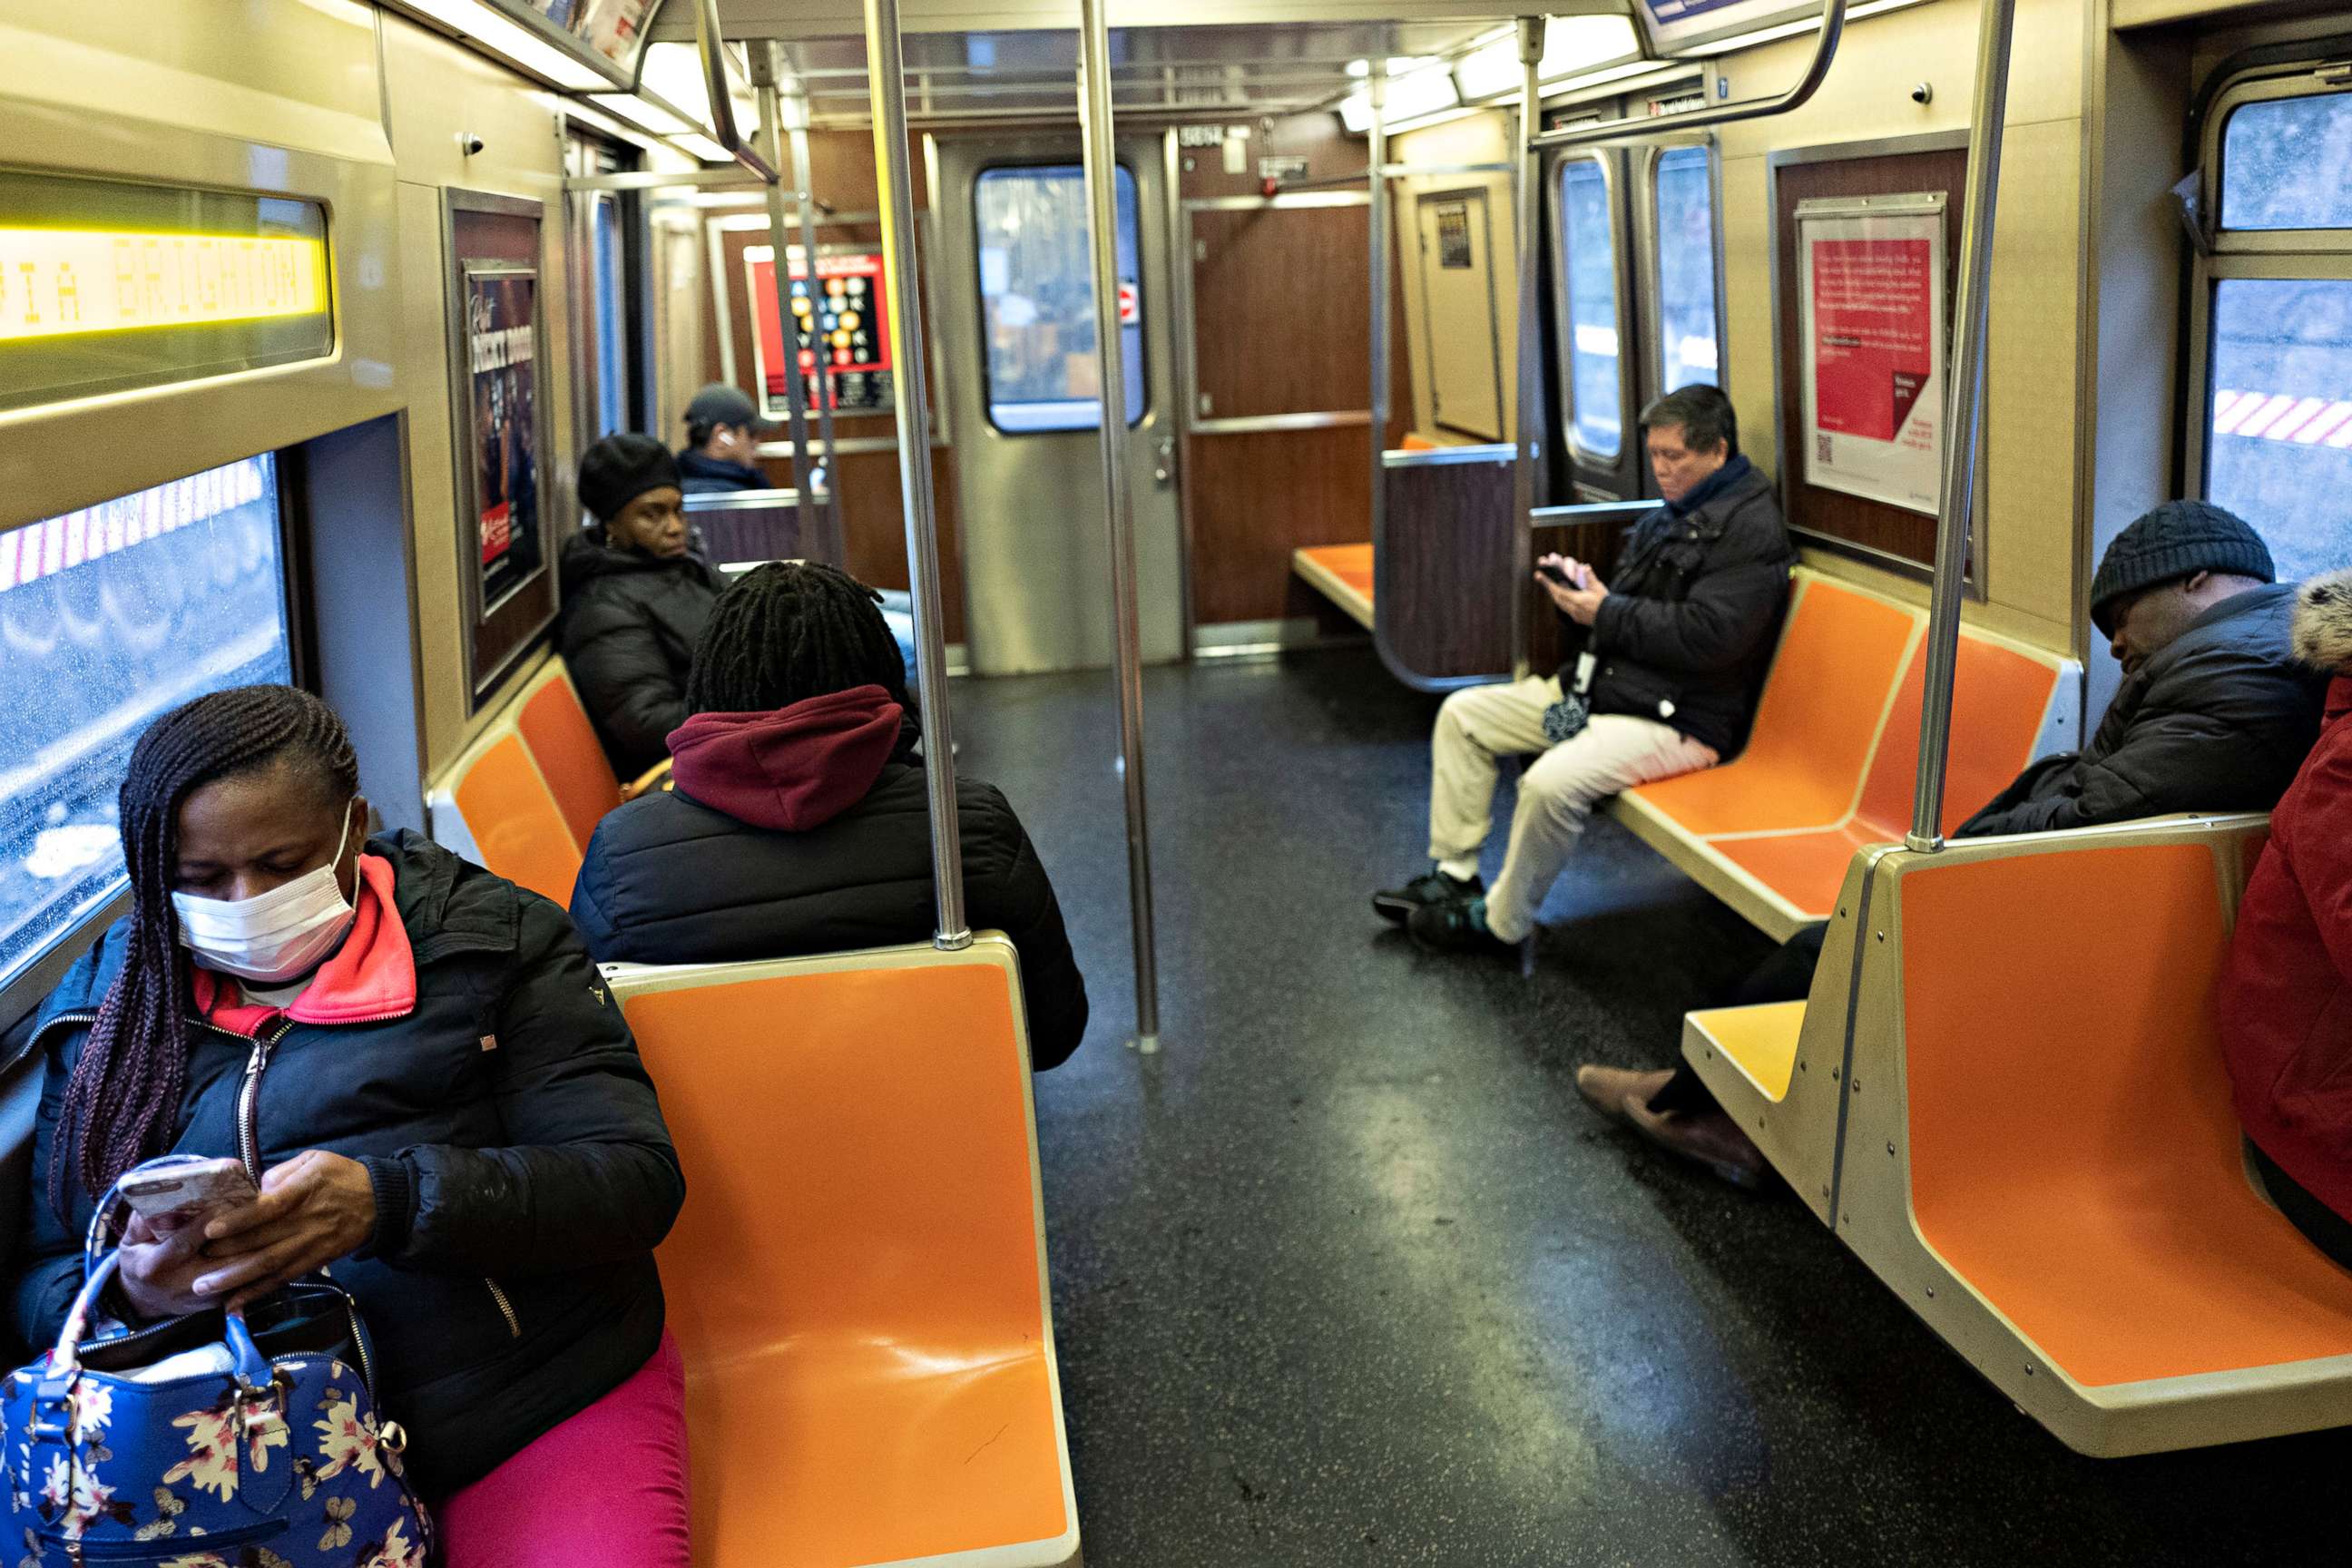 PHOTO: Subway passengers space out their seating during a during rush hour on a subway, March 17, 2020 in New York City. The subway is normally crowded but many people are staying home out of concern for the spread of coronavirus. 